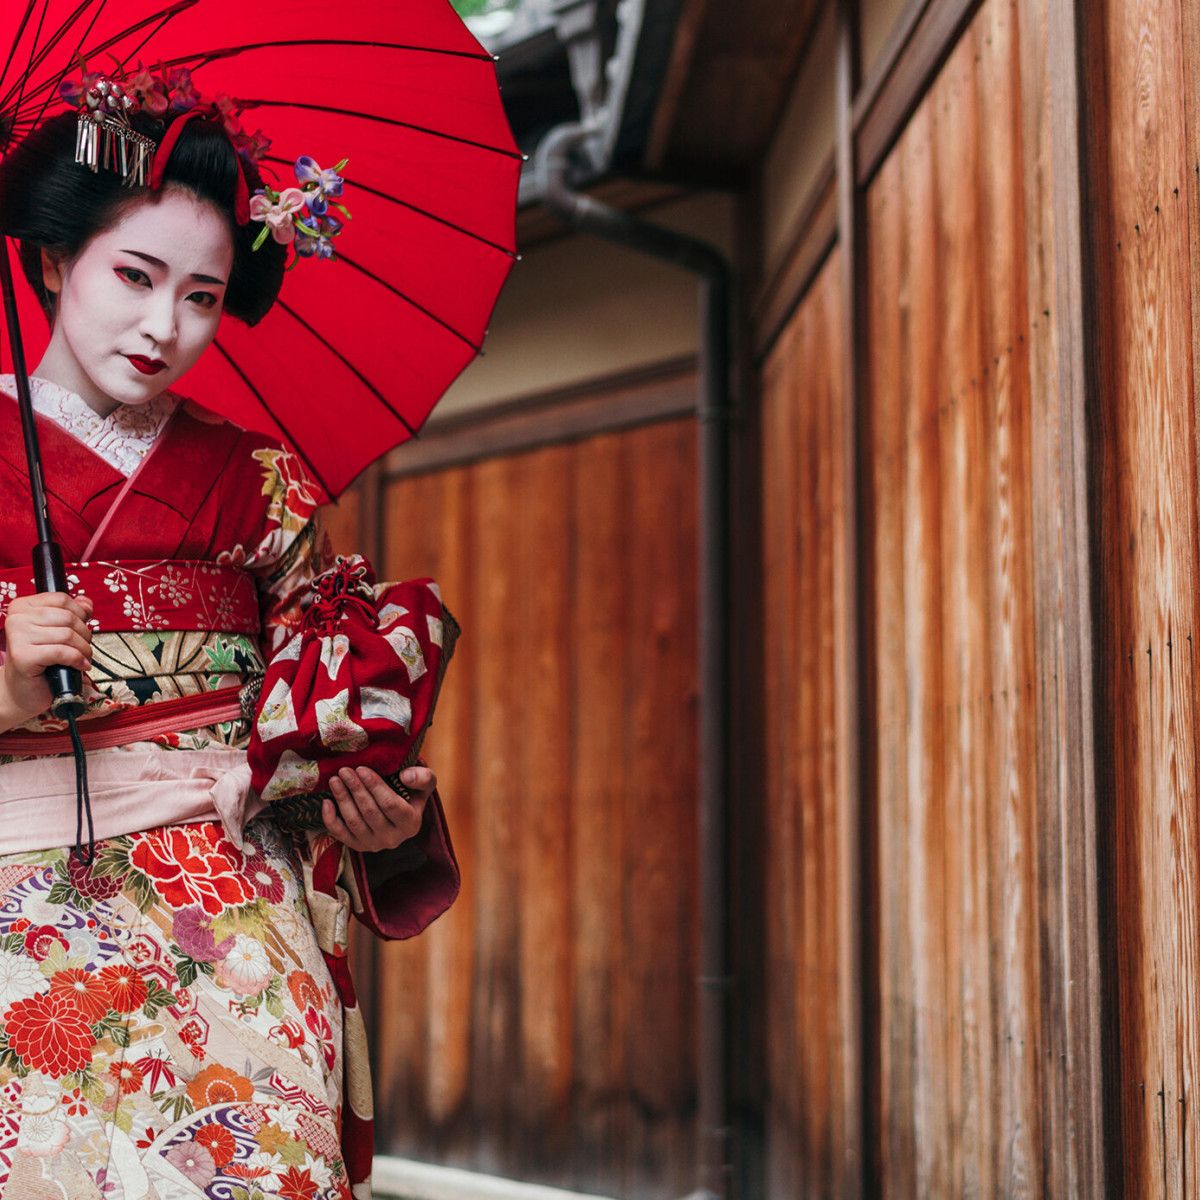 16 things you didn't know about the Japanese Kimono